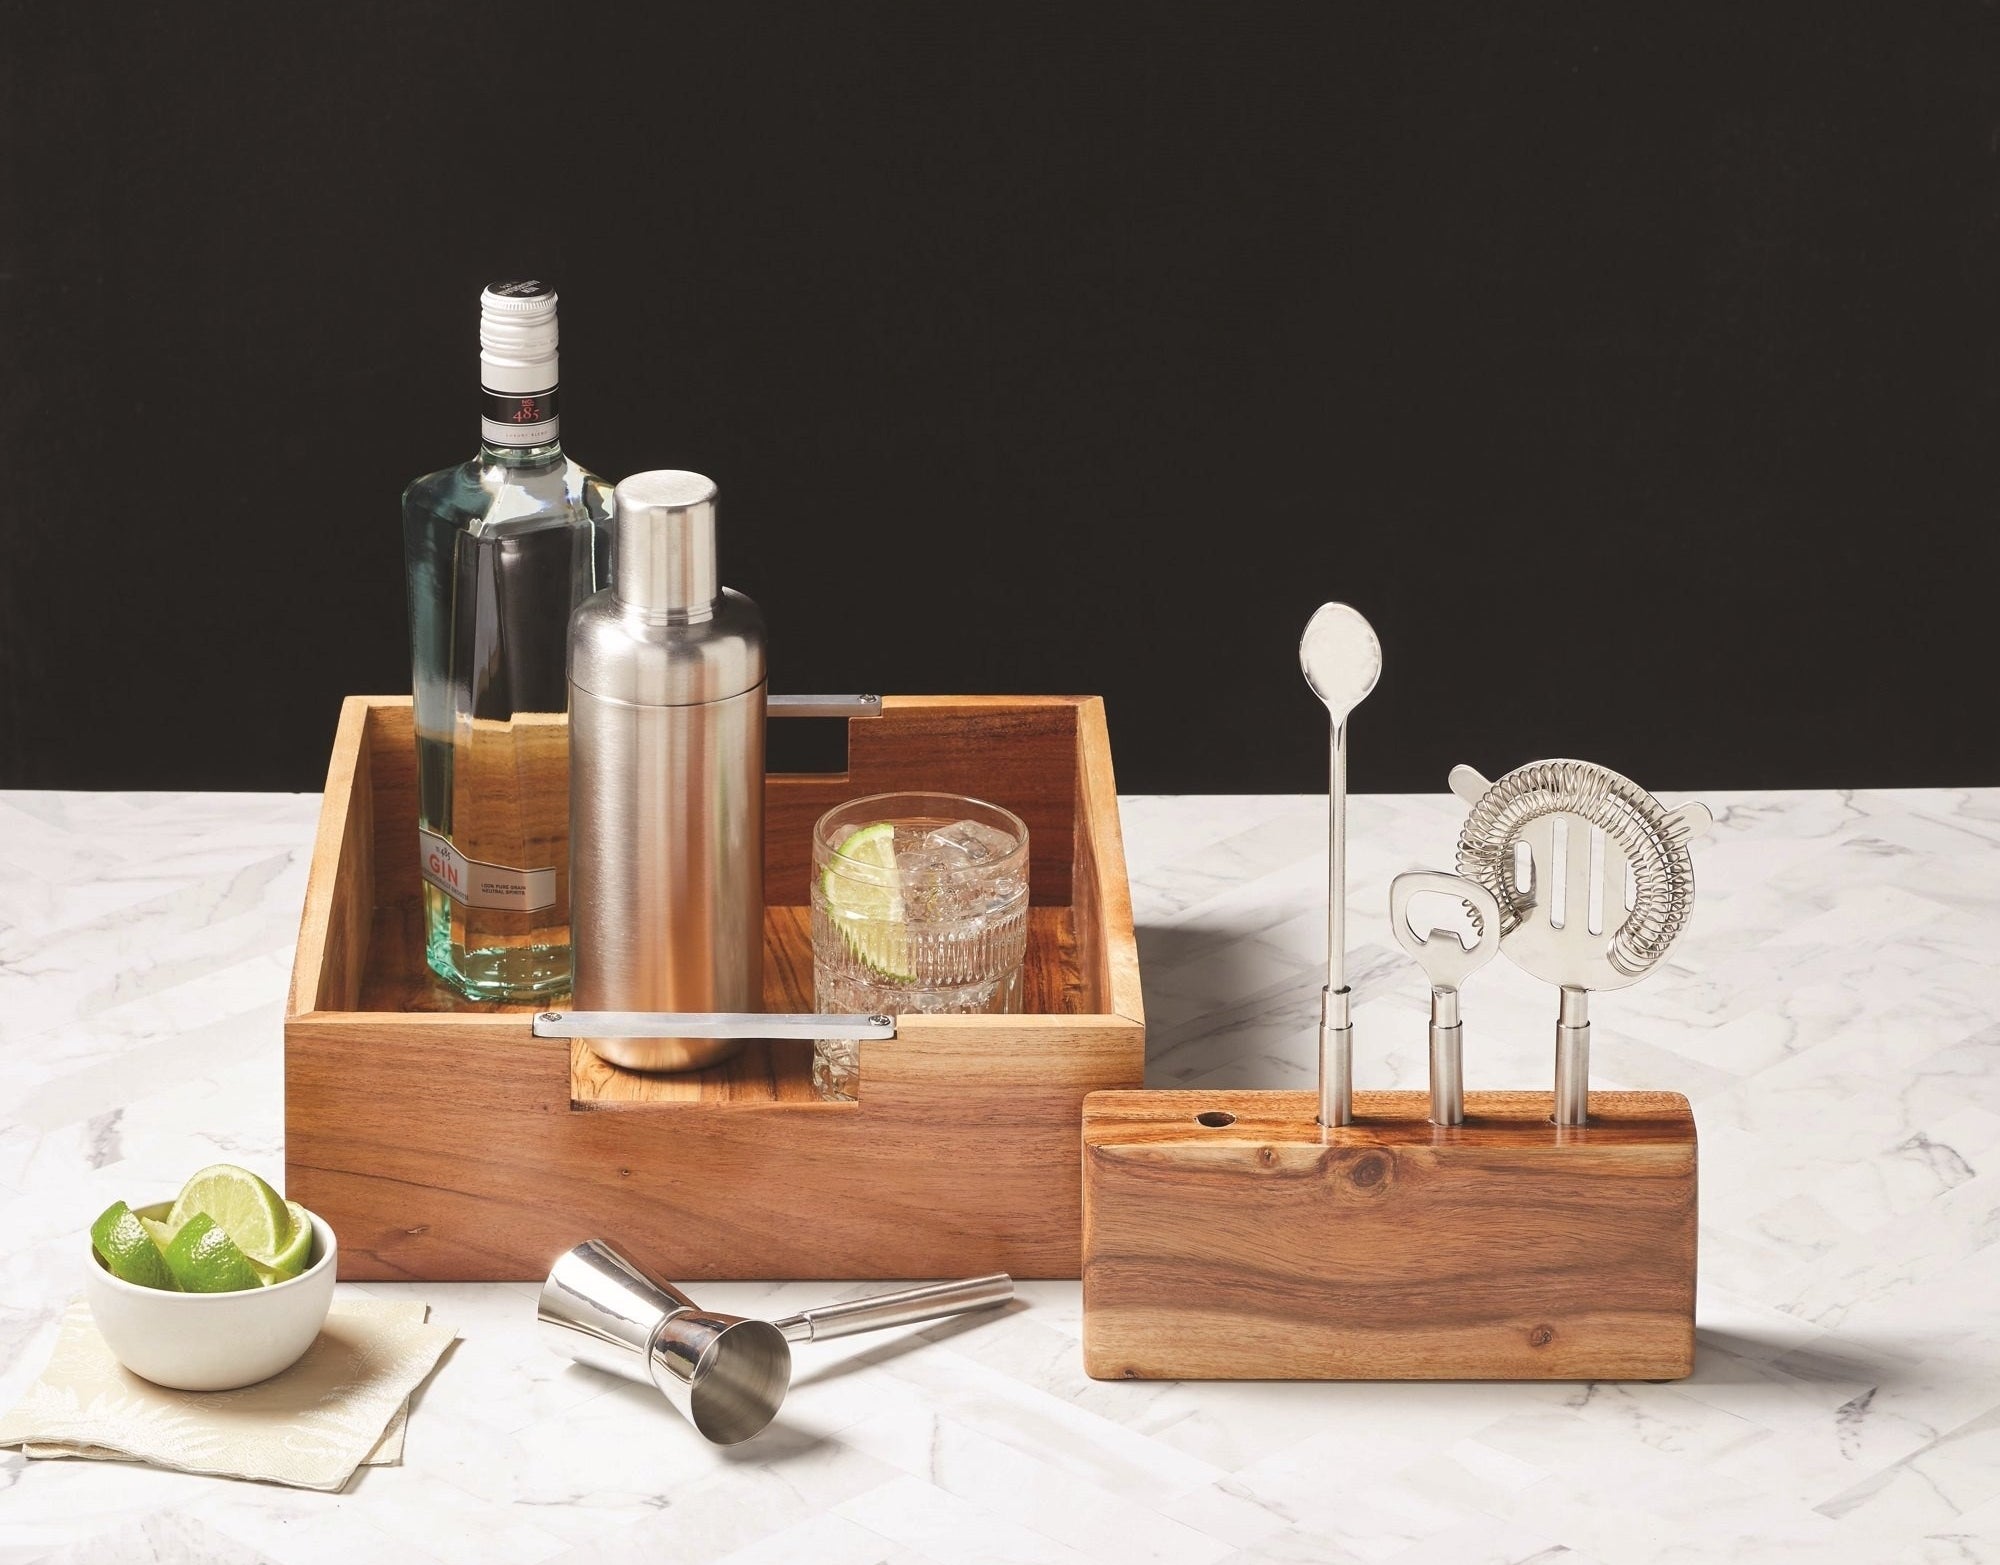 Stainless steel mixology kit in wooden case with cocktail and bottle of liquor